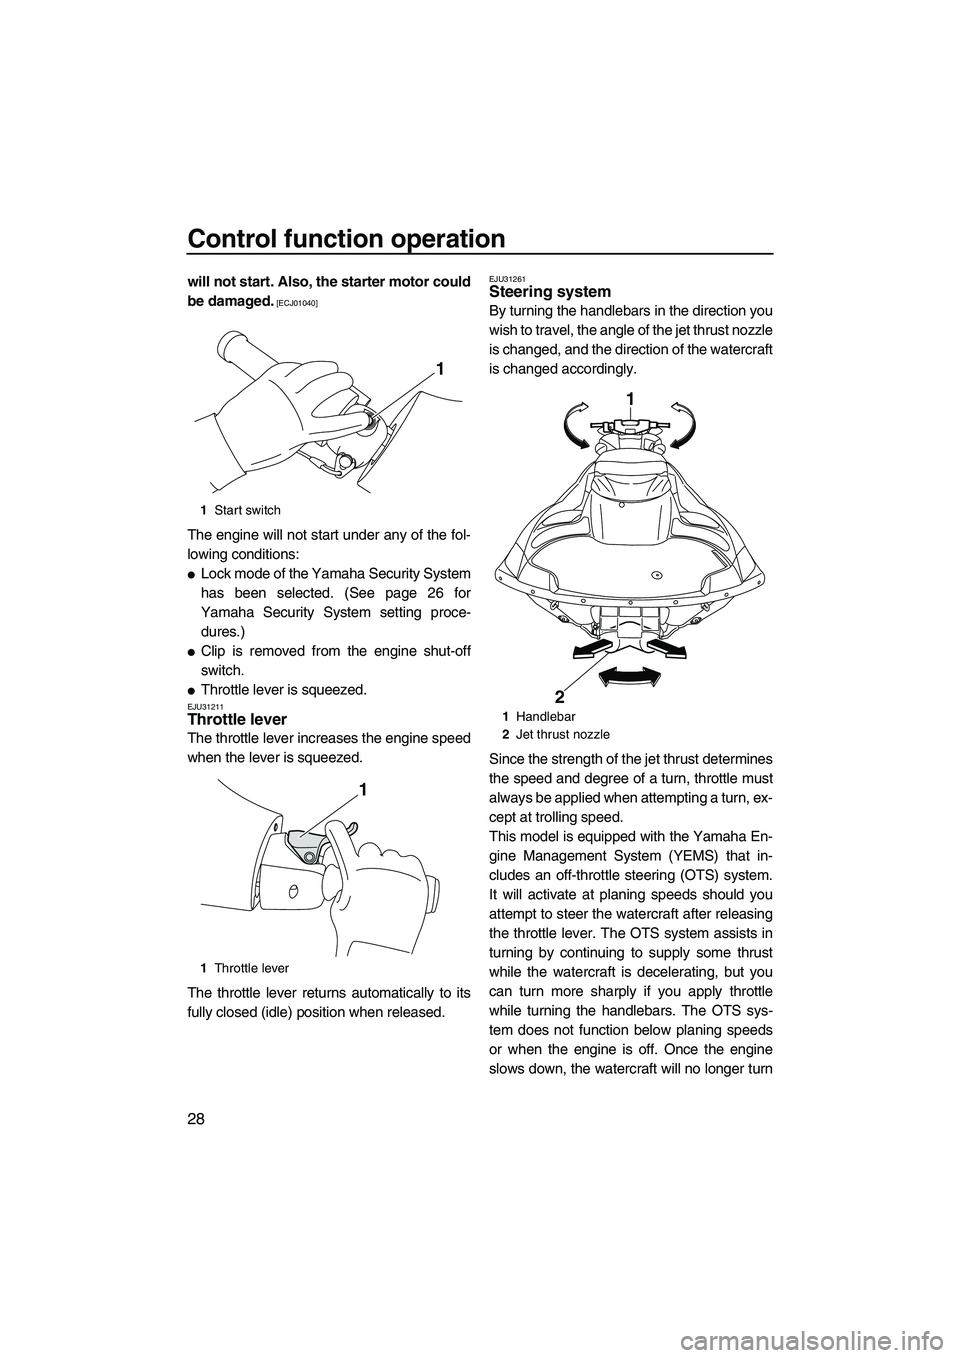 YAMAHA FZR 2012  Owners Manual Control function operation
28
will not start. Also, the starter motor could
be damaged.
 [ECJ01040]
The engine will not start under any of the fol-
lowing conditions:
Lock mode of the Yamaha Security